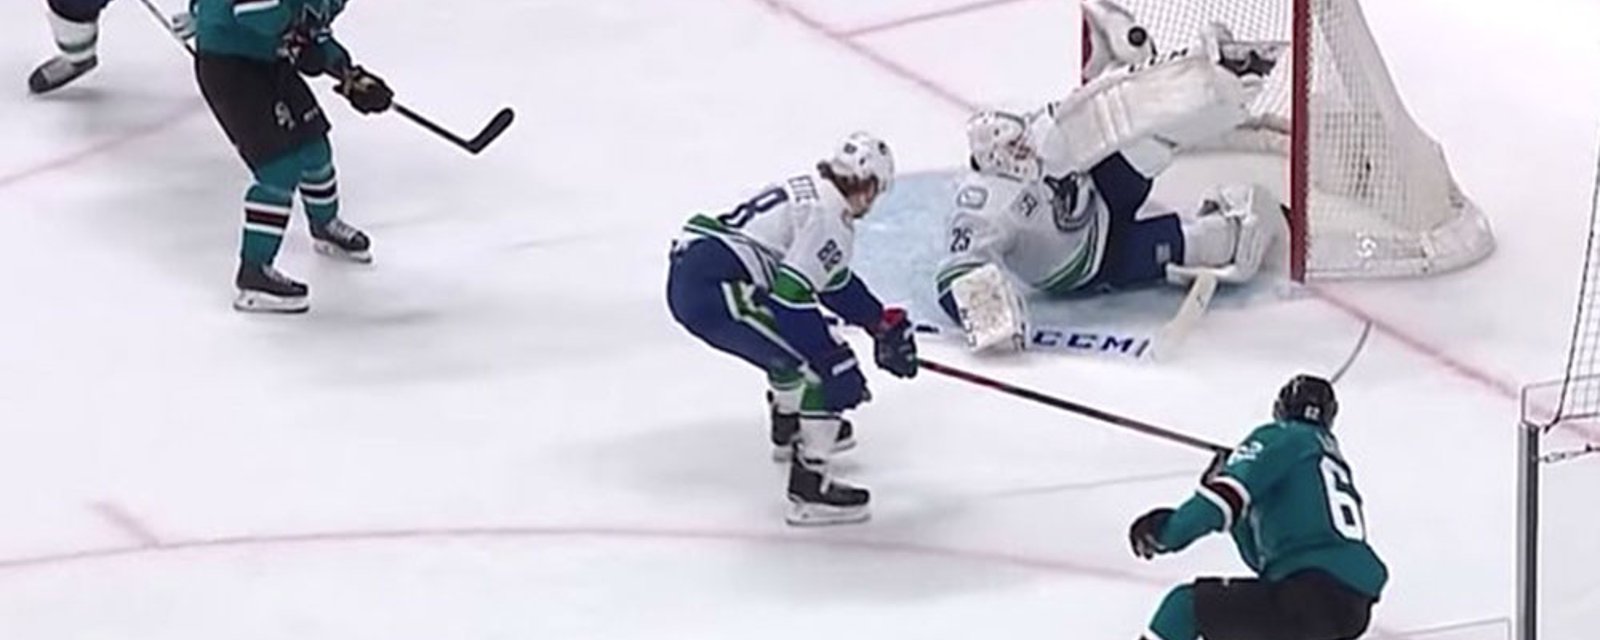 Markstrom pulls off a save of the year candidate